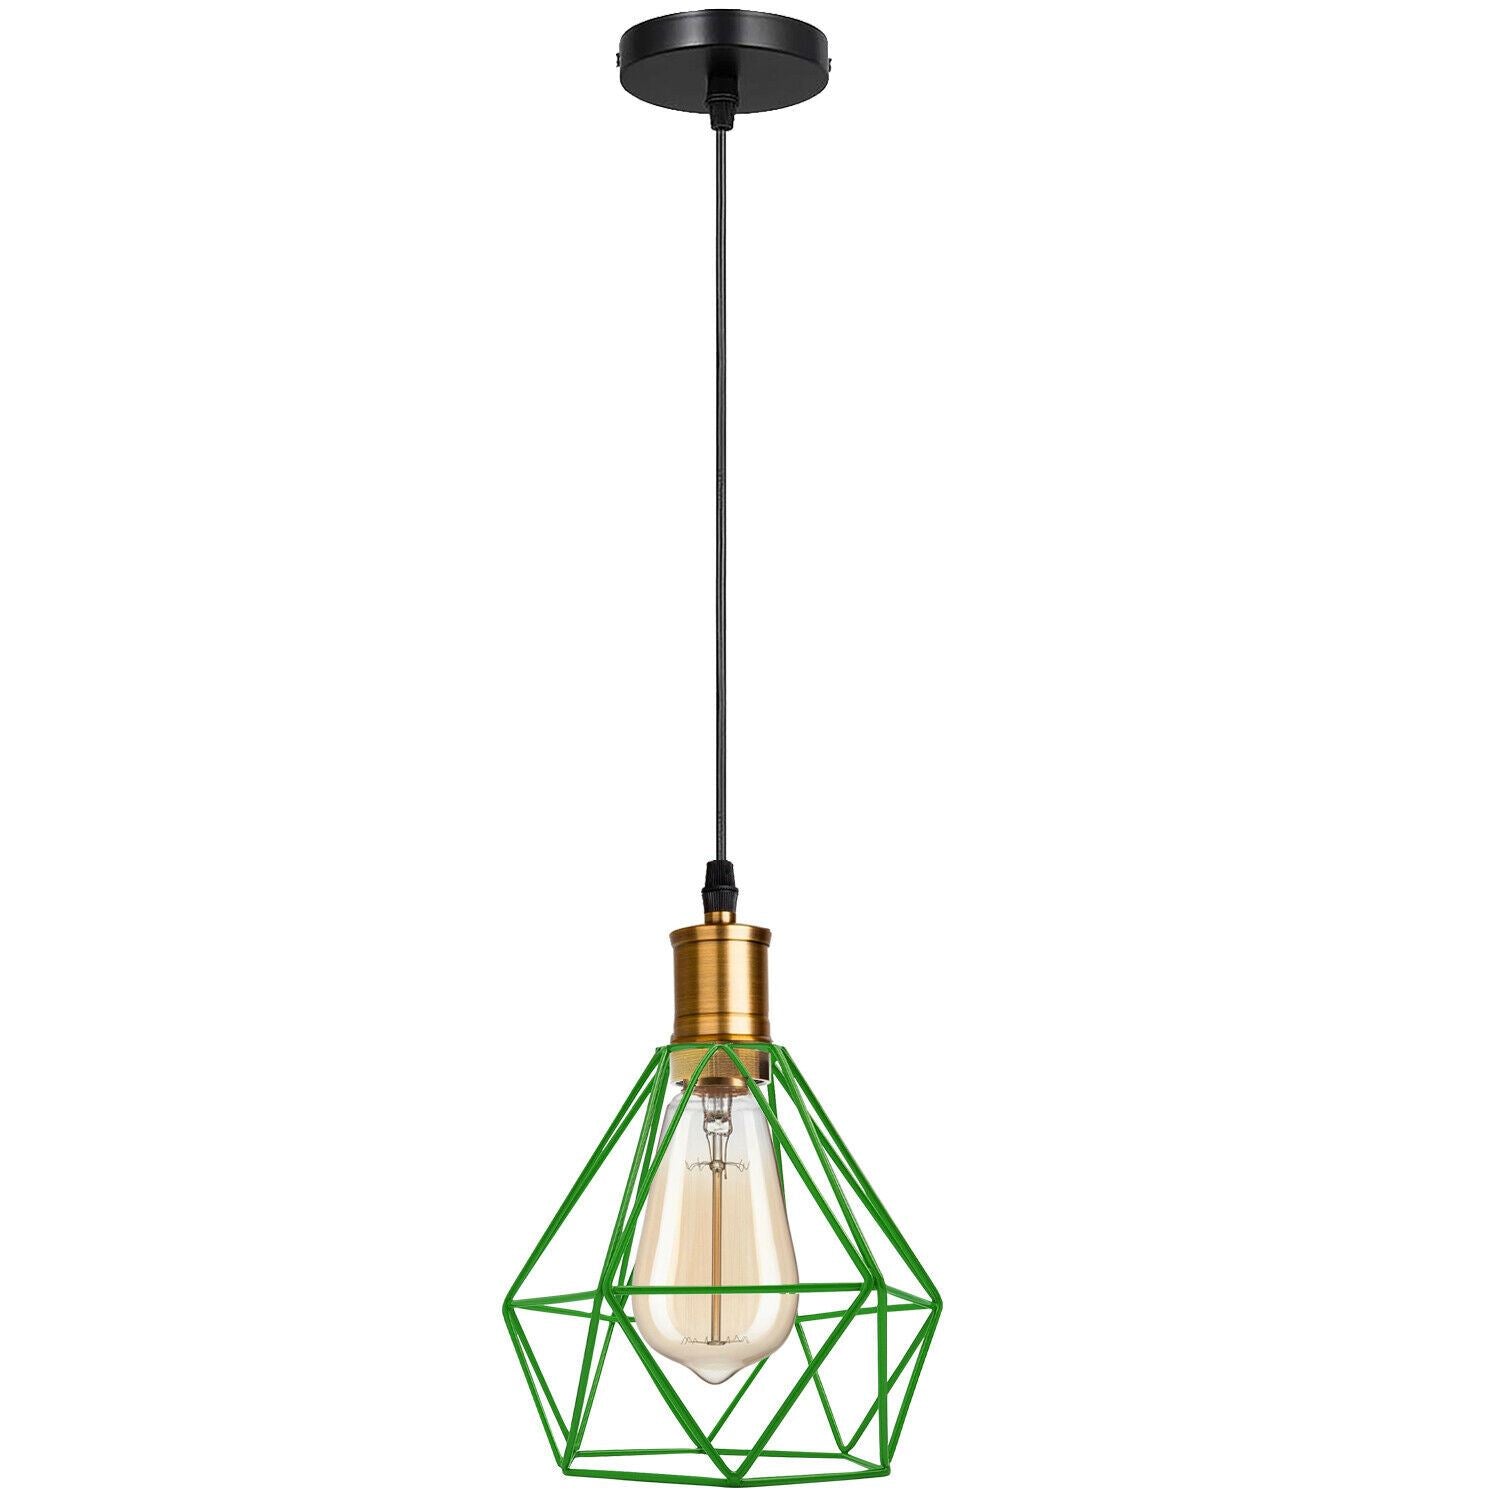 Modern Vintage Diamond Cage Ceiling Pendant Light Fitting Geometric Wire Cage Style Hanging Indoor Lights with 95cm Adjustable Wire~1266 - LEDSone UK Ltd